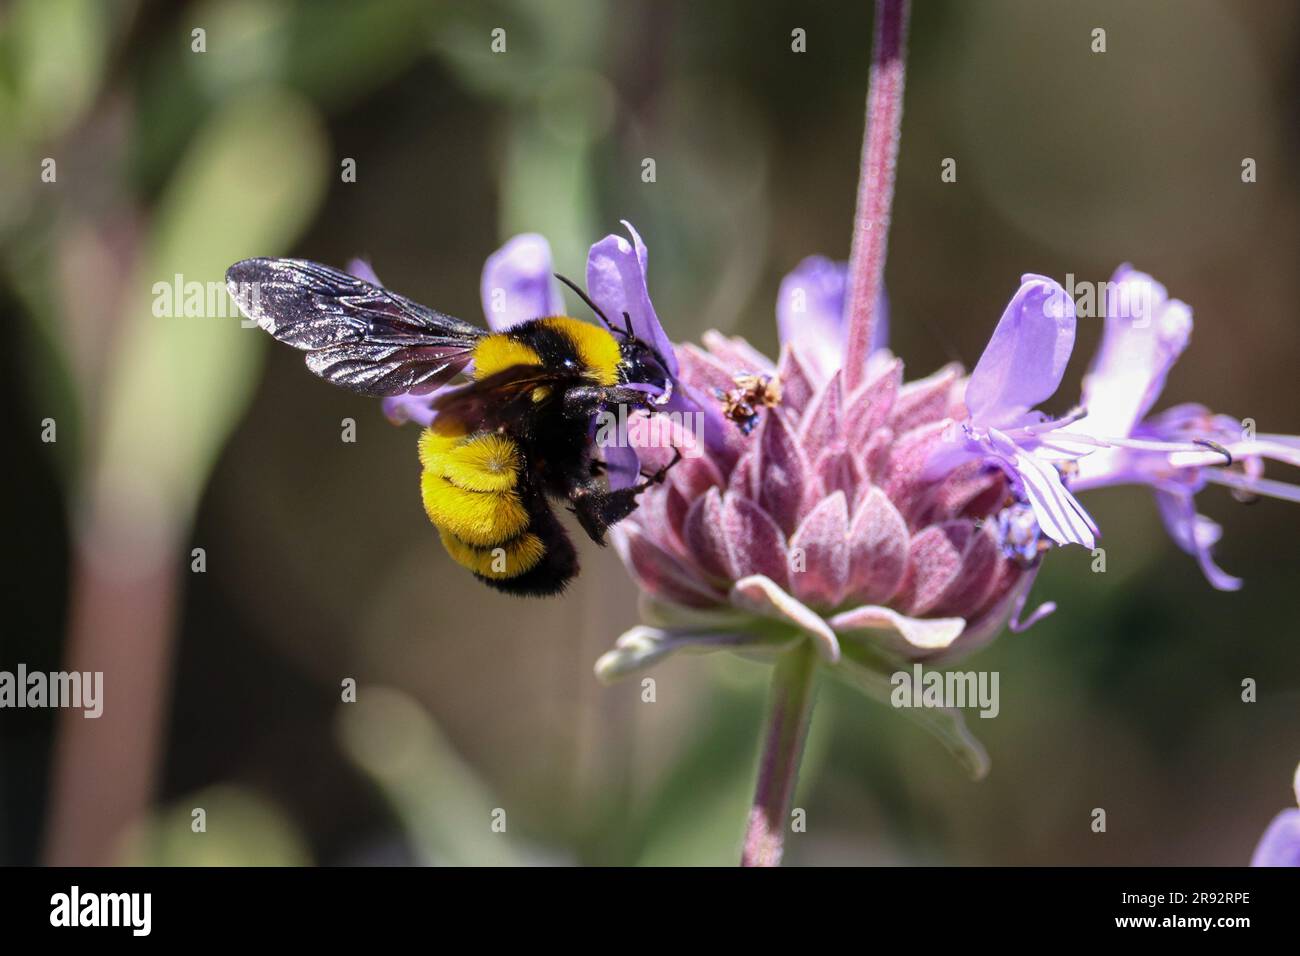 Sonoran bumblebee or Bombus sonorus feeding on some purple flowers at the Home Depot in Payson, Arizona. Stock Photo